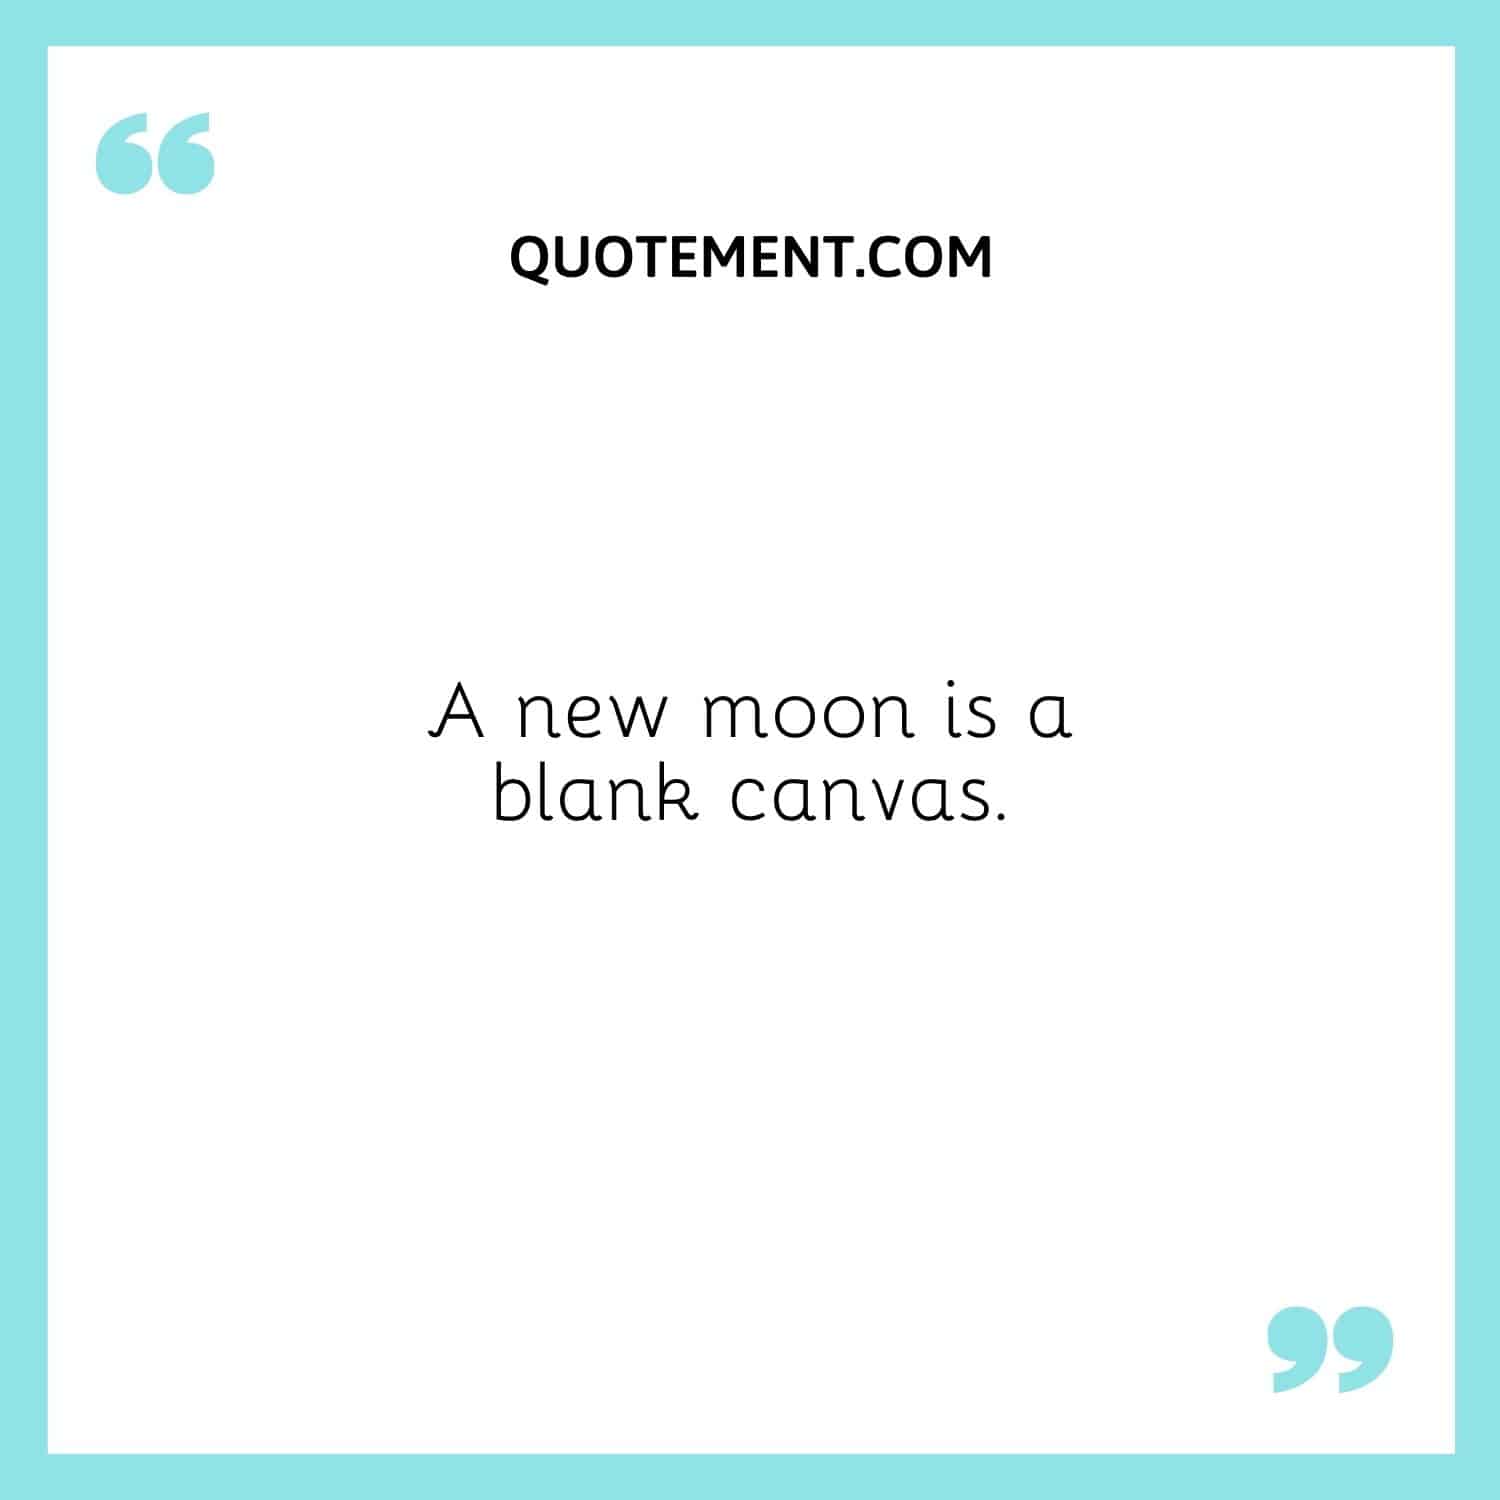 A new moon is a blank canvas.